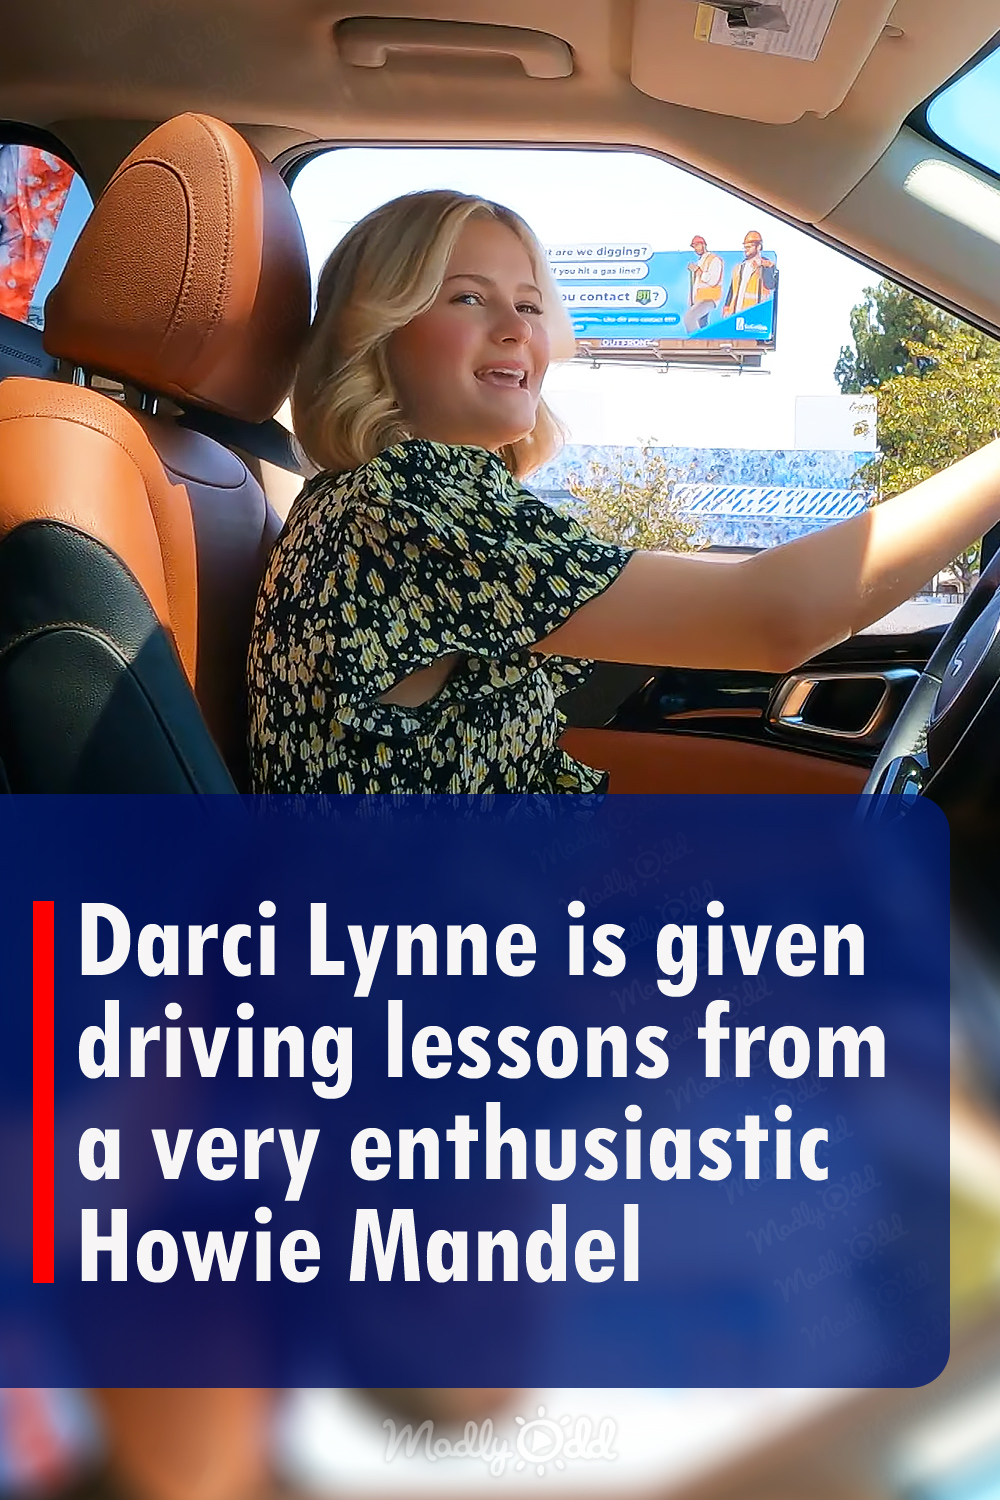 Darci Lynne is given driving lessons from a very enthusiastic Howie Mandel